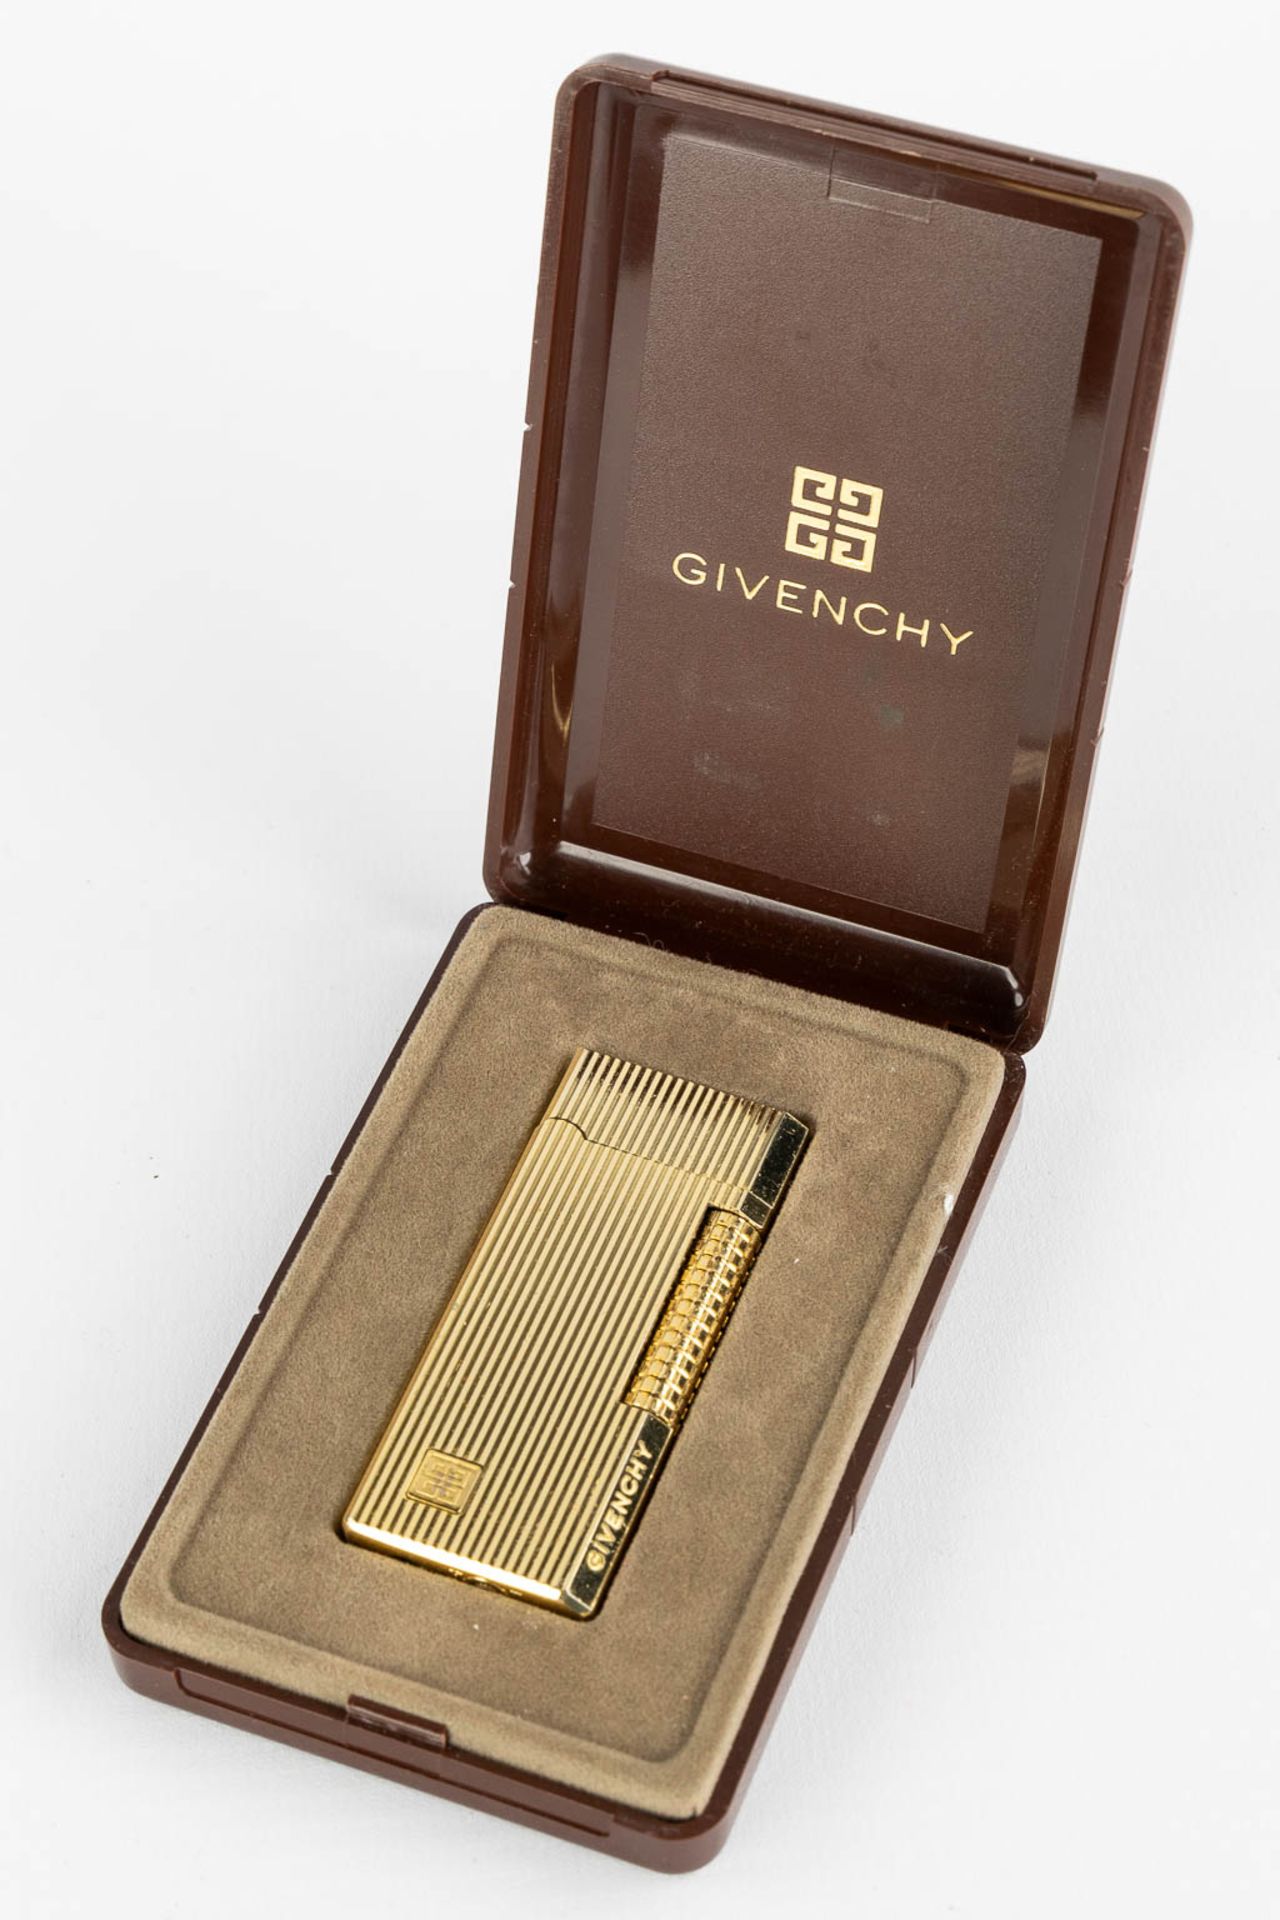 ST. Dupont, Three gold and silver plated lighters, added a Givency lighter. (L:1 x W:3,5 x H:6 cm) - Image 5 of 14